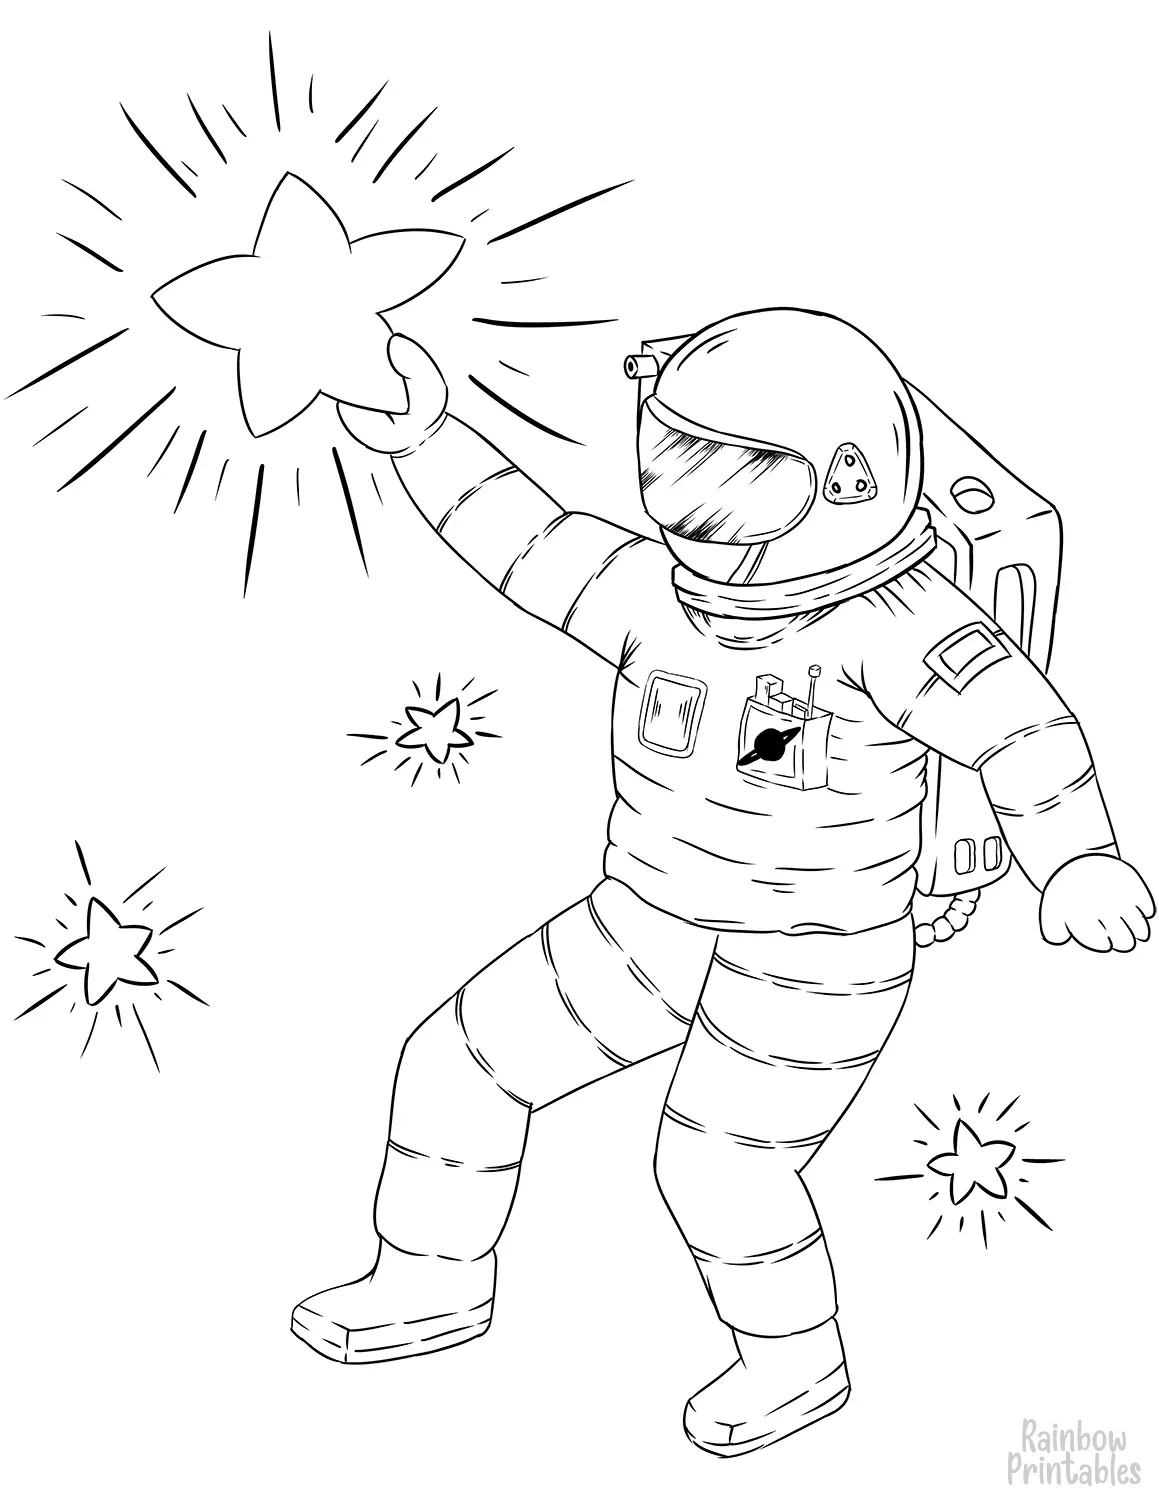 ASTRONAUT-HOLDING-GRABBING-STAR-Clipart Coloring Pages for Kids Adults Art Activities Line Art